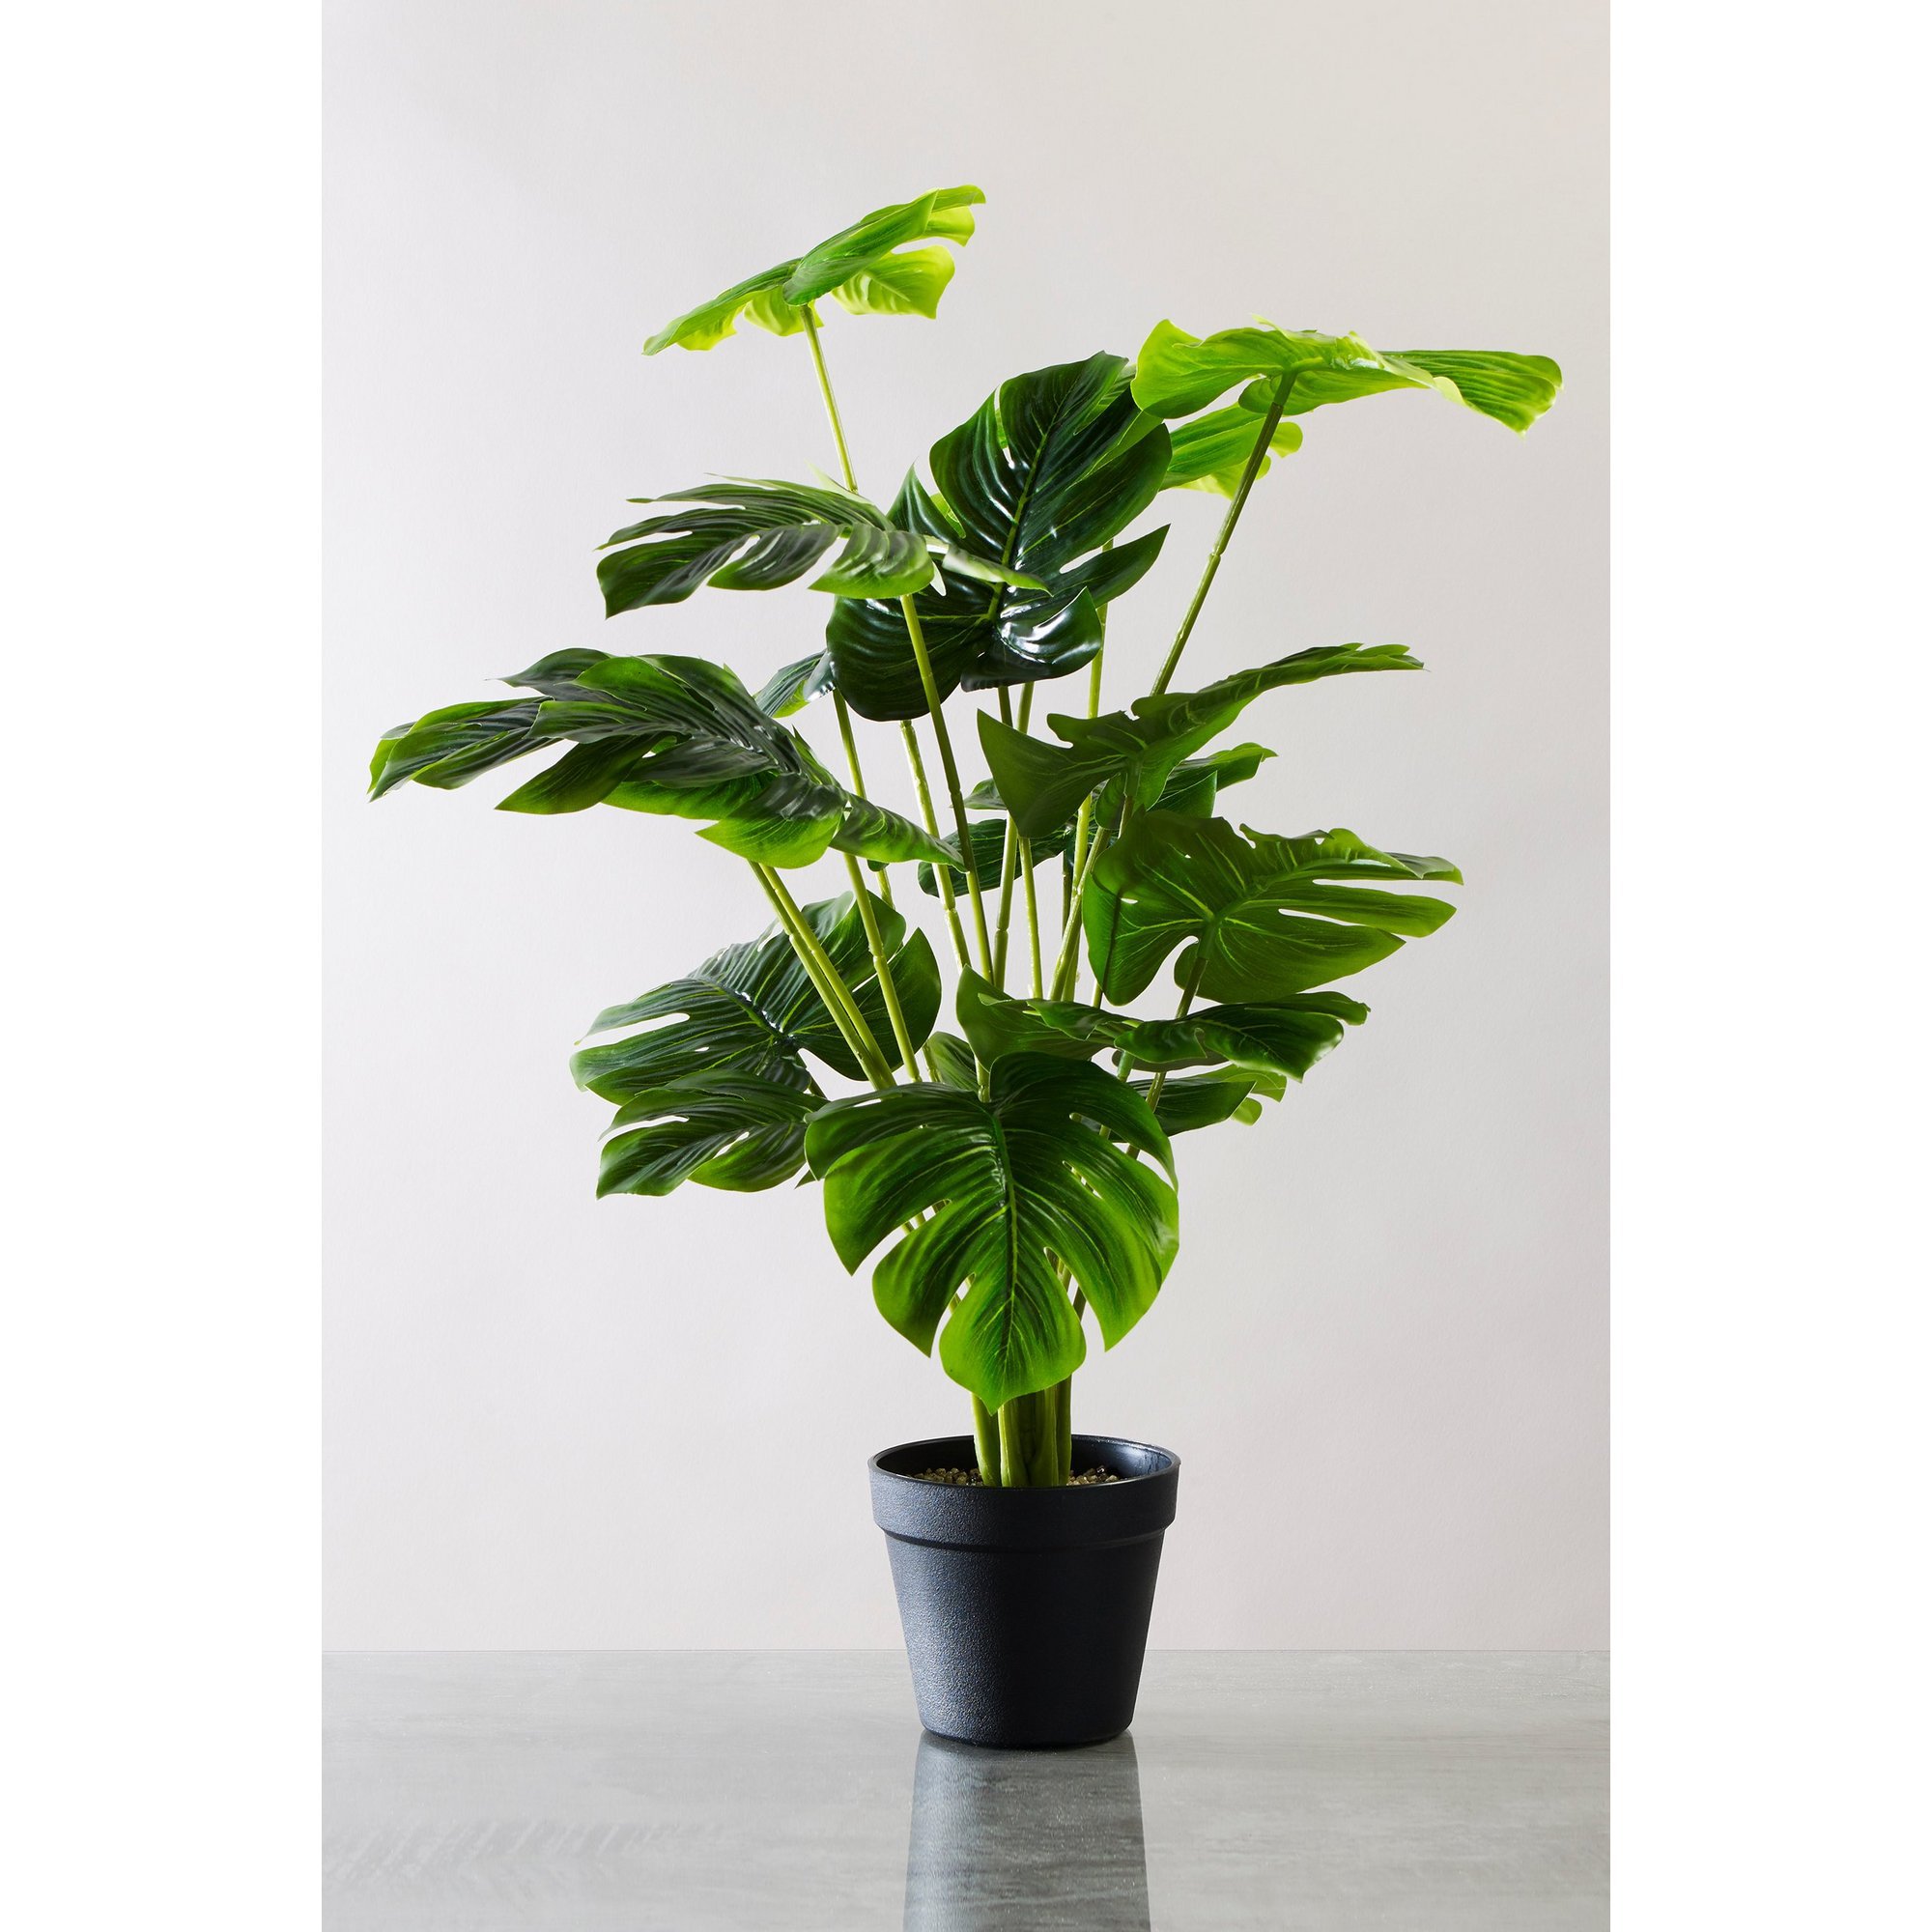 Artificial Cheese Plant